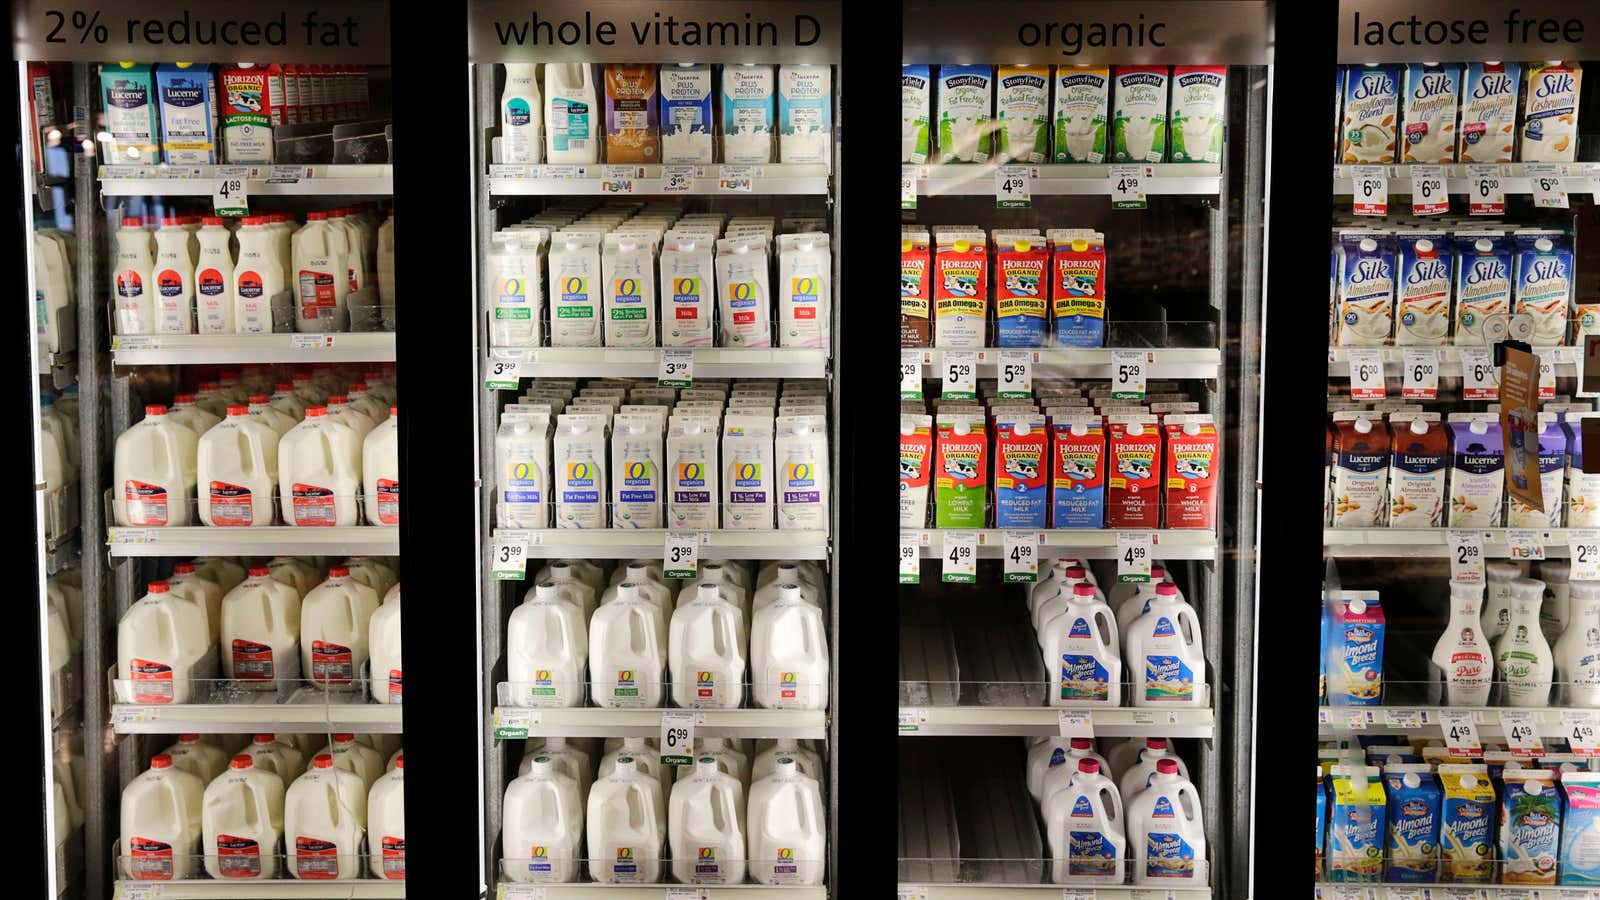 Trouble in the dairy aisle.